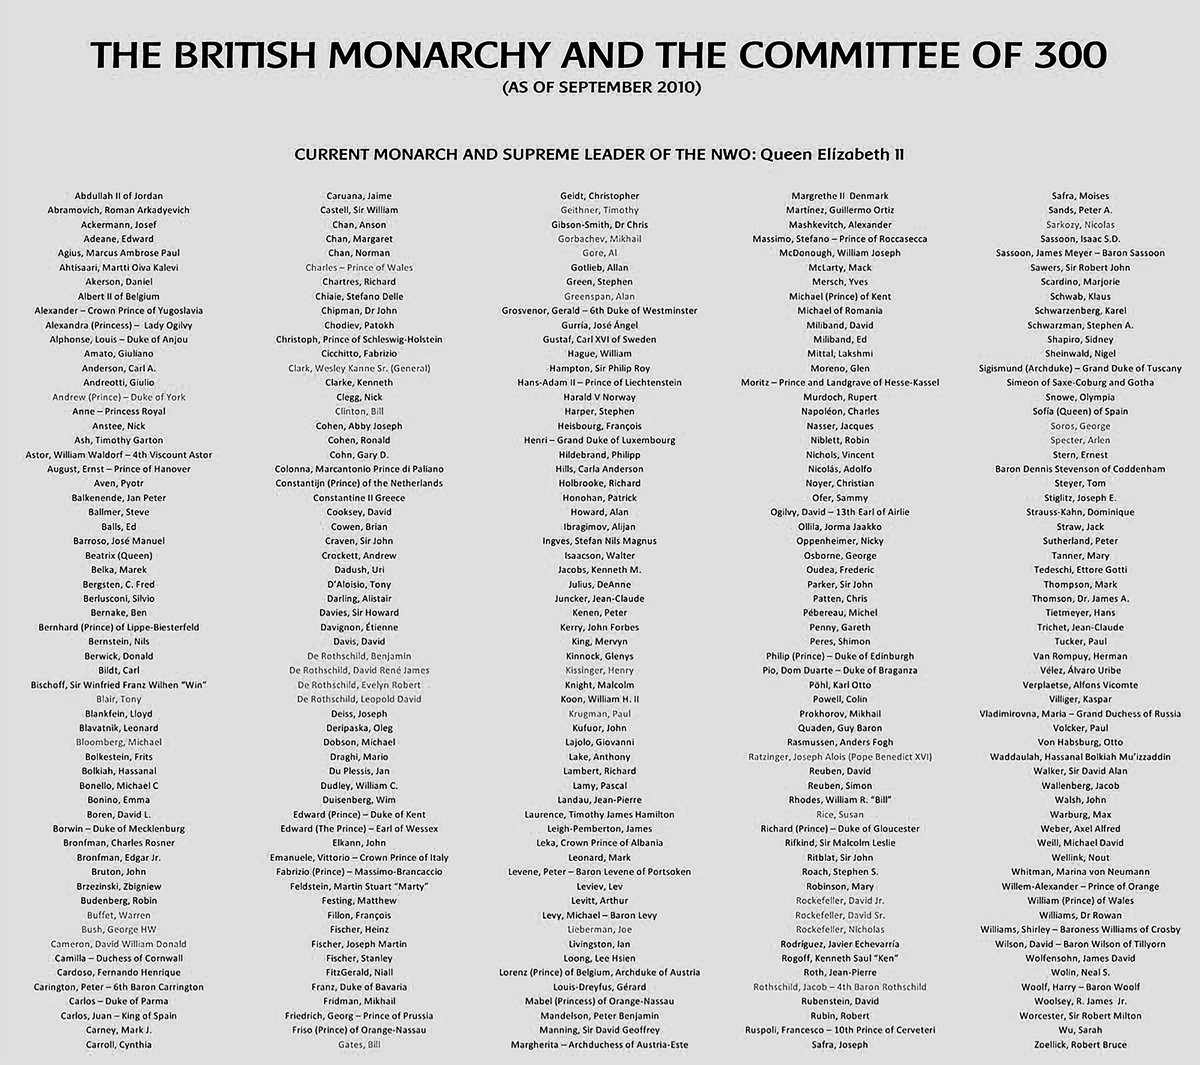 'The Committee Of 300', Or 'The Olympians', Is A Cynical Group Founded By The British Aristocracy In 1727. It Consists Of Exactly 300 Members At Any Given Time. Its Sole Purpose Is Organizing Politics, Commerce, Banking, Media, And The Military For The Centralized Global Efforts.